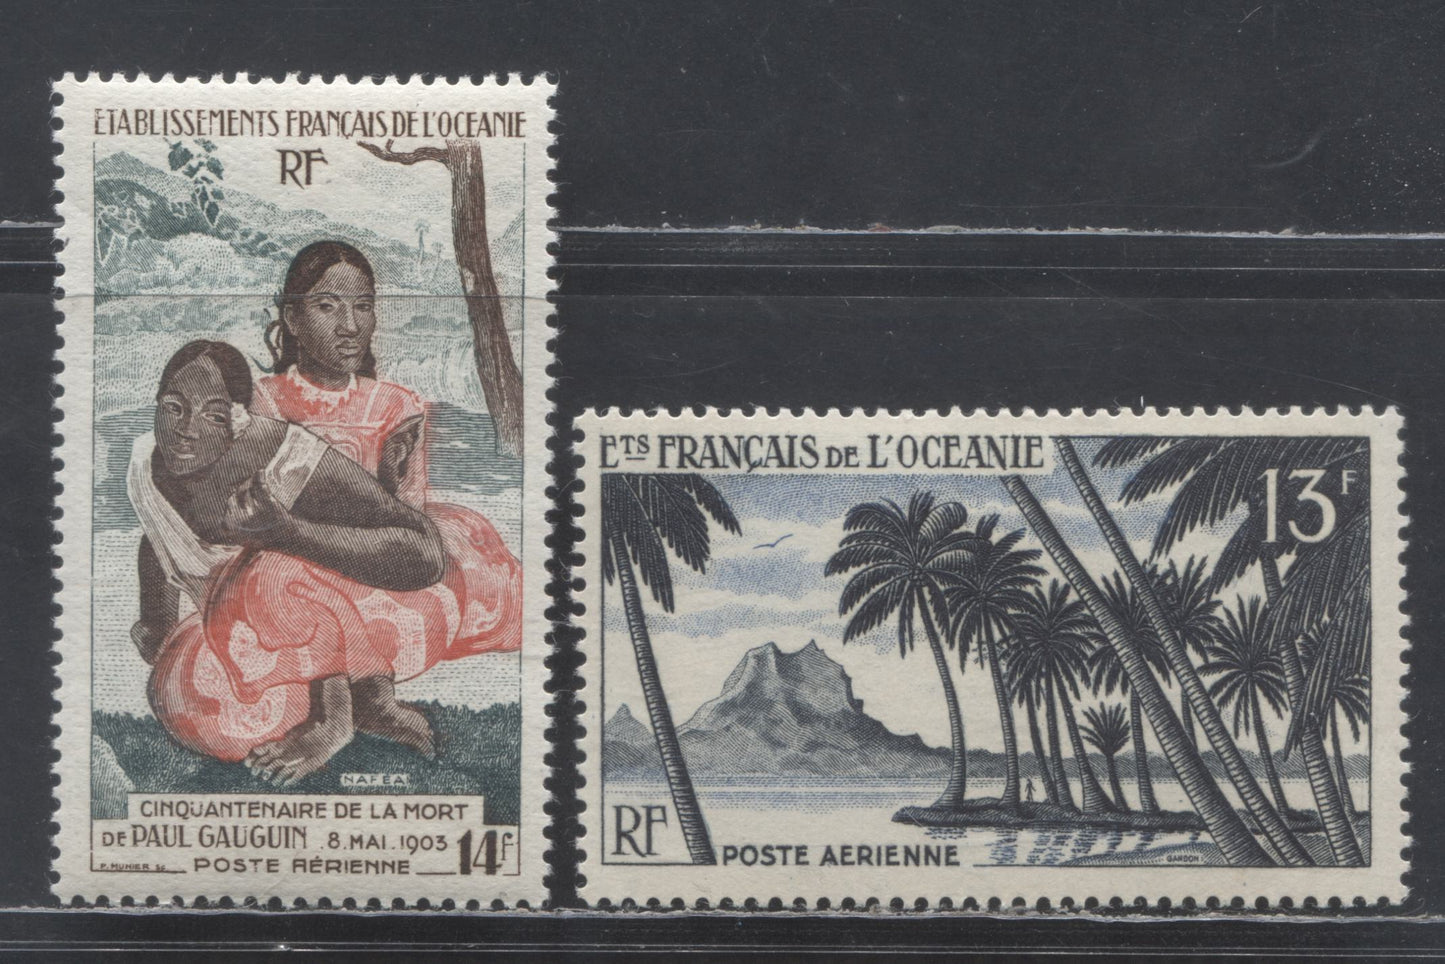 Lot 8 French Oceania SC#C21/C23 1953-1955 Airmail Issue, 2 VFOG & VLH Singles, Click on Listing to See ALL Pictures, Estimated Value $60